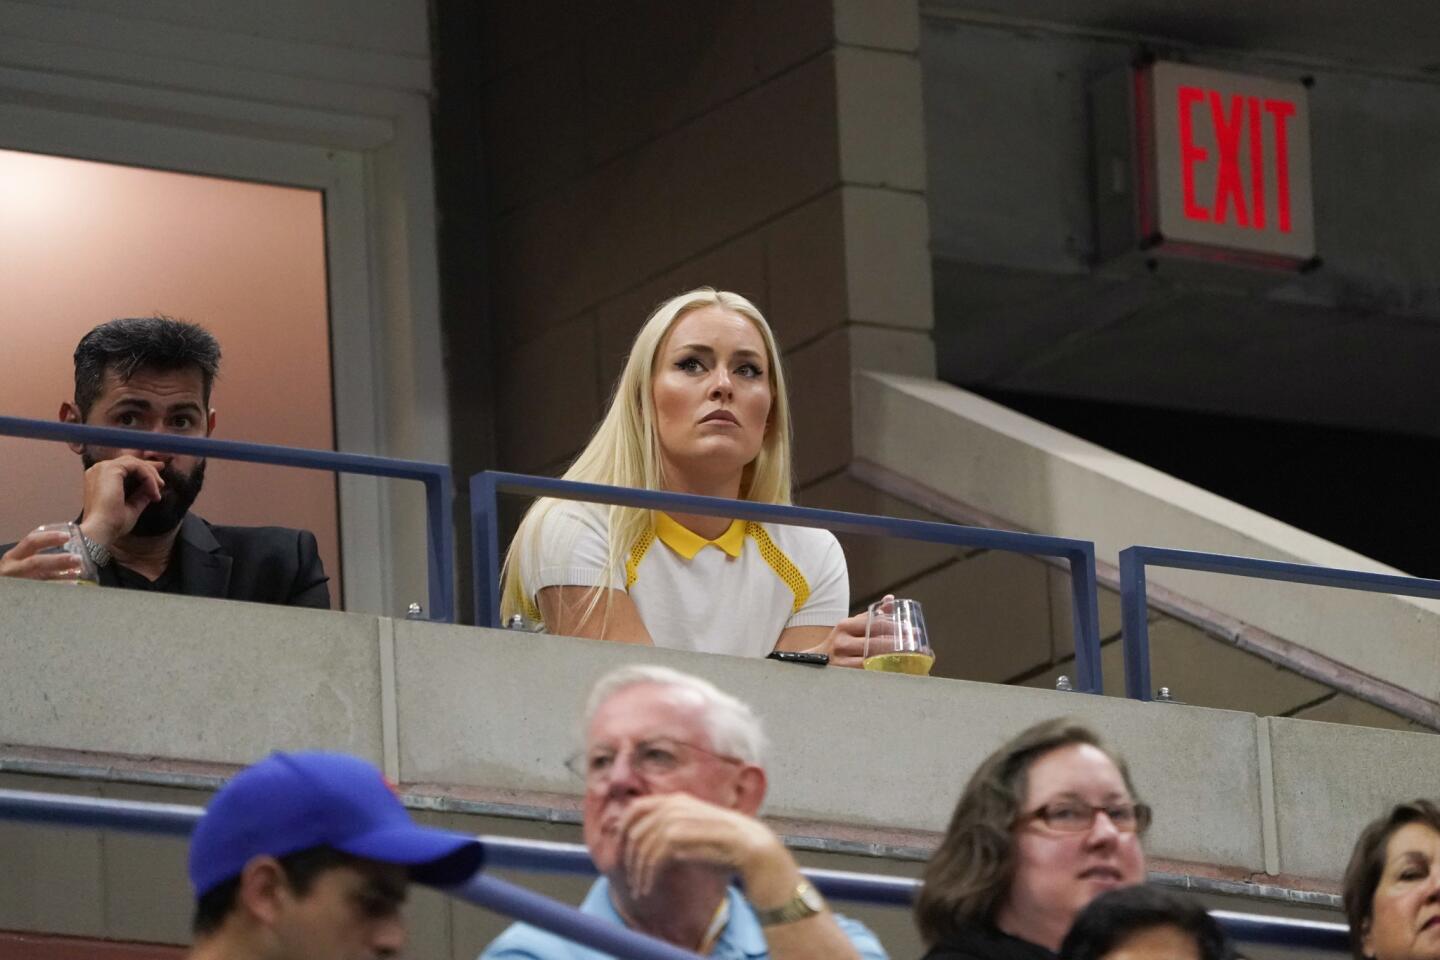 Lindsey Vonn watches the match between Daniil Medvedev of Russia and rigor Dimitrov of Bulgaria during their Singles Men's Semi-finals match at the 2019 US Open on Sept. 6, 2019.